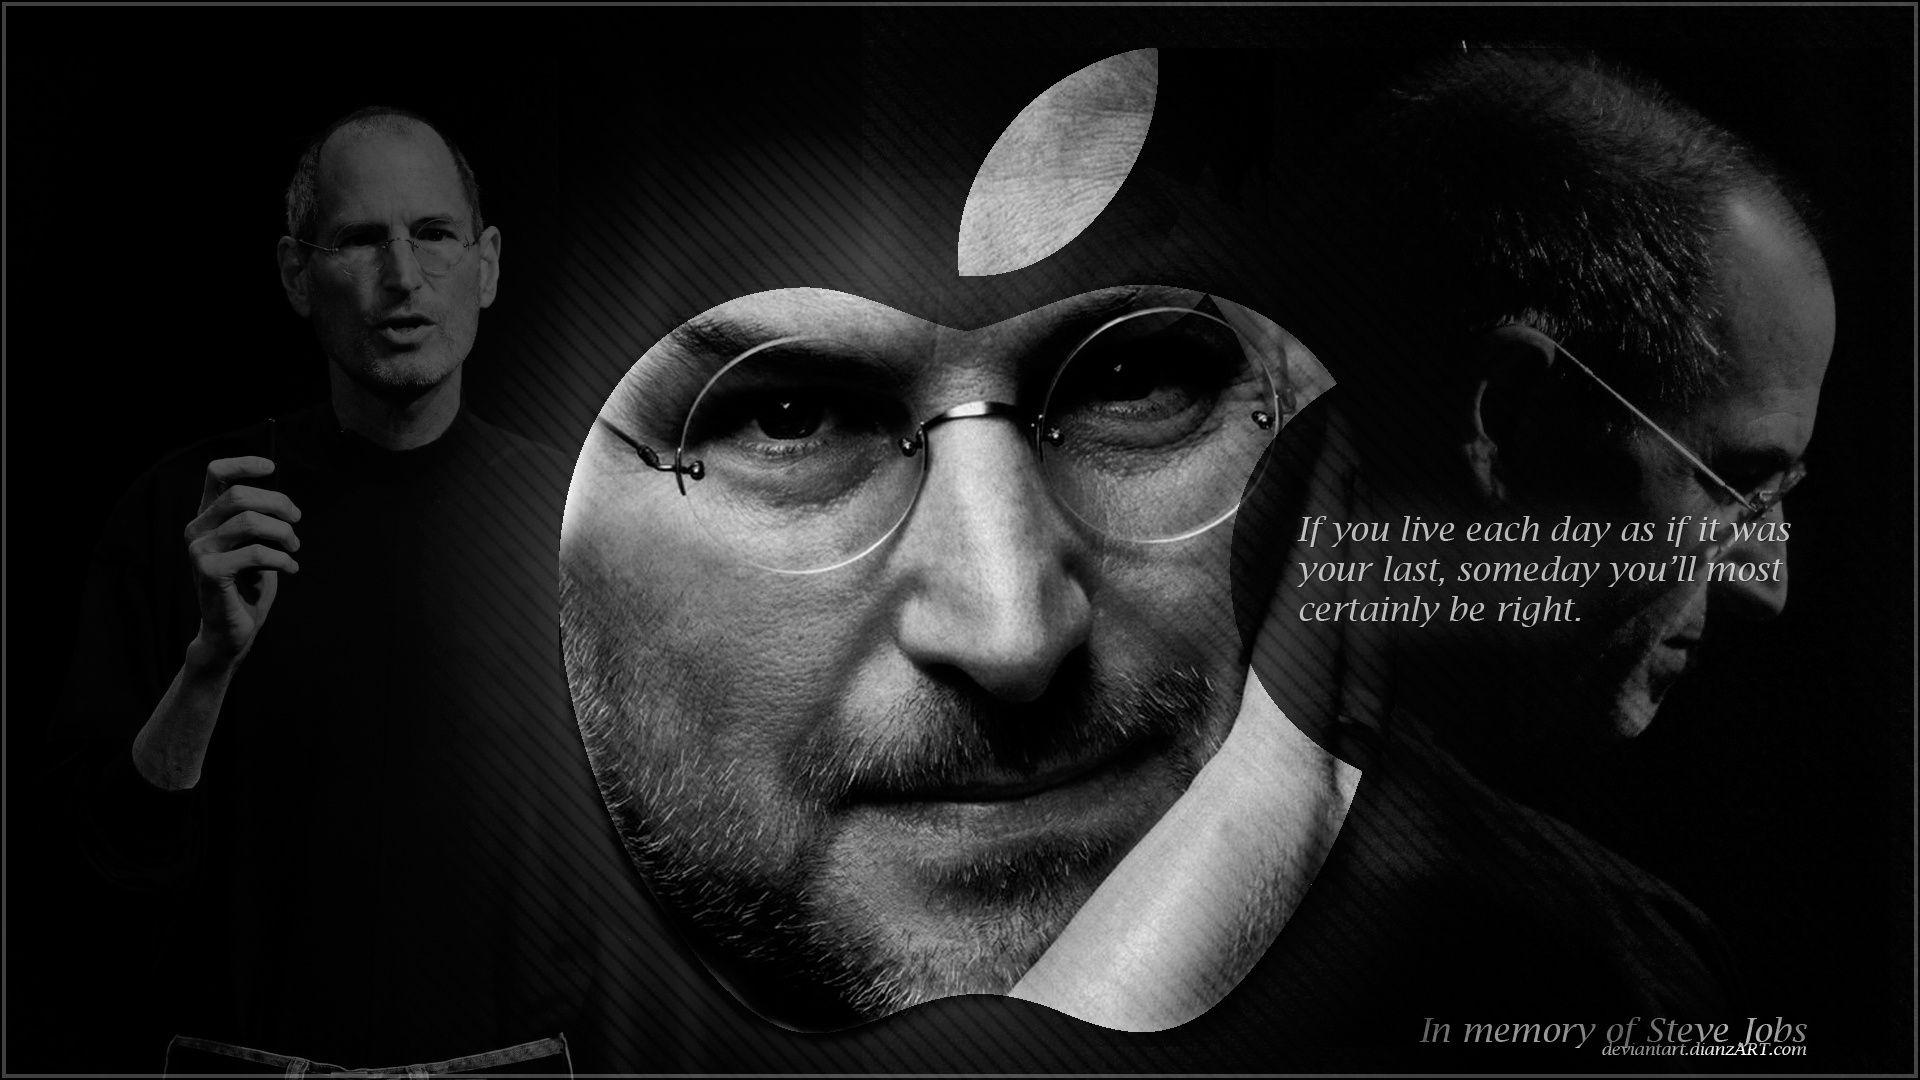 The story of how Steve Jobs saved Apple from disaster and led it to rule the world, in 39 photos ...